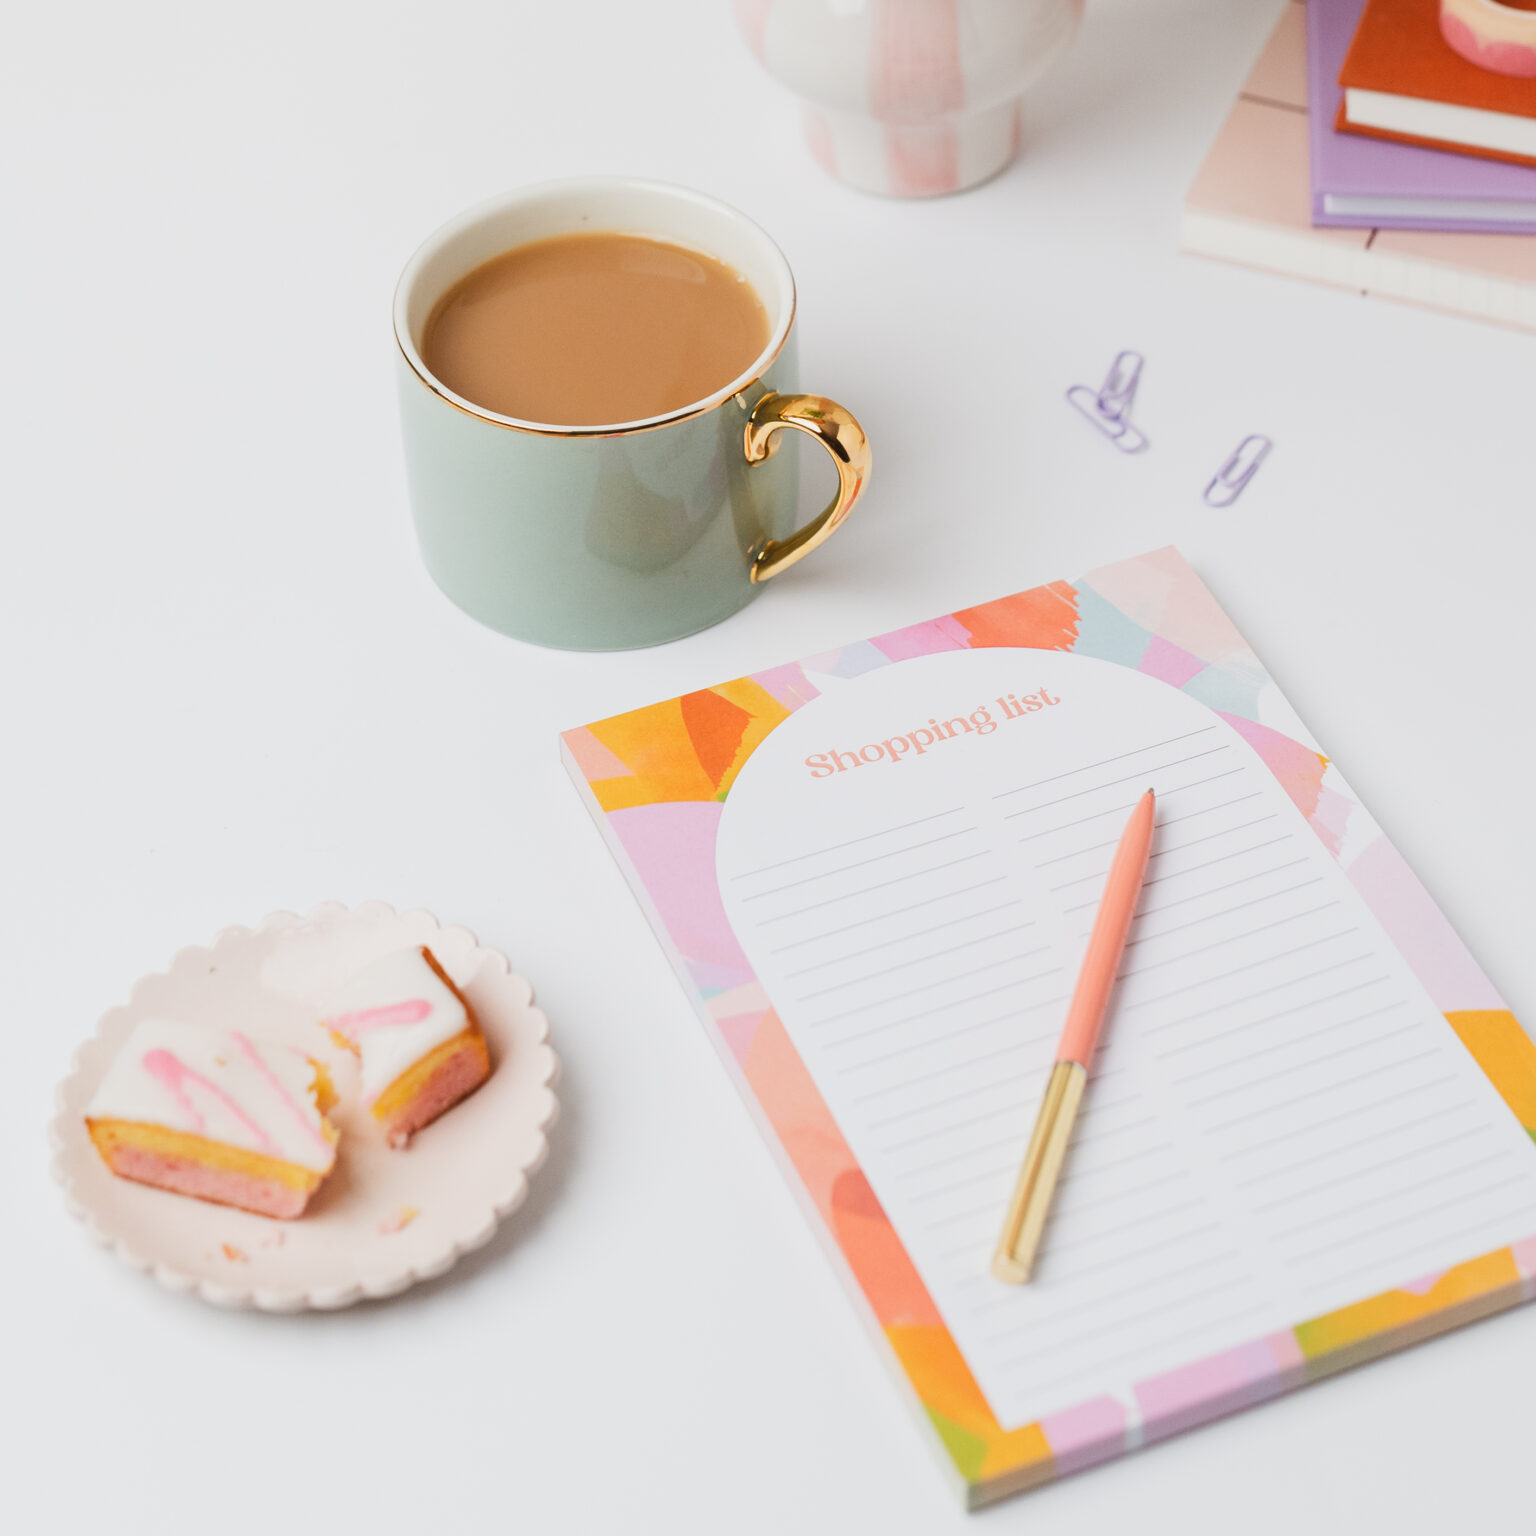 food shopping list note pad with tea and cake ready to write list down